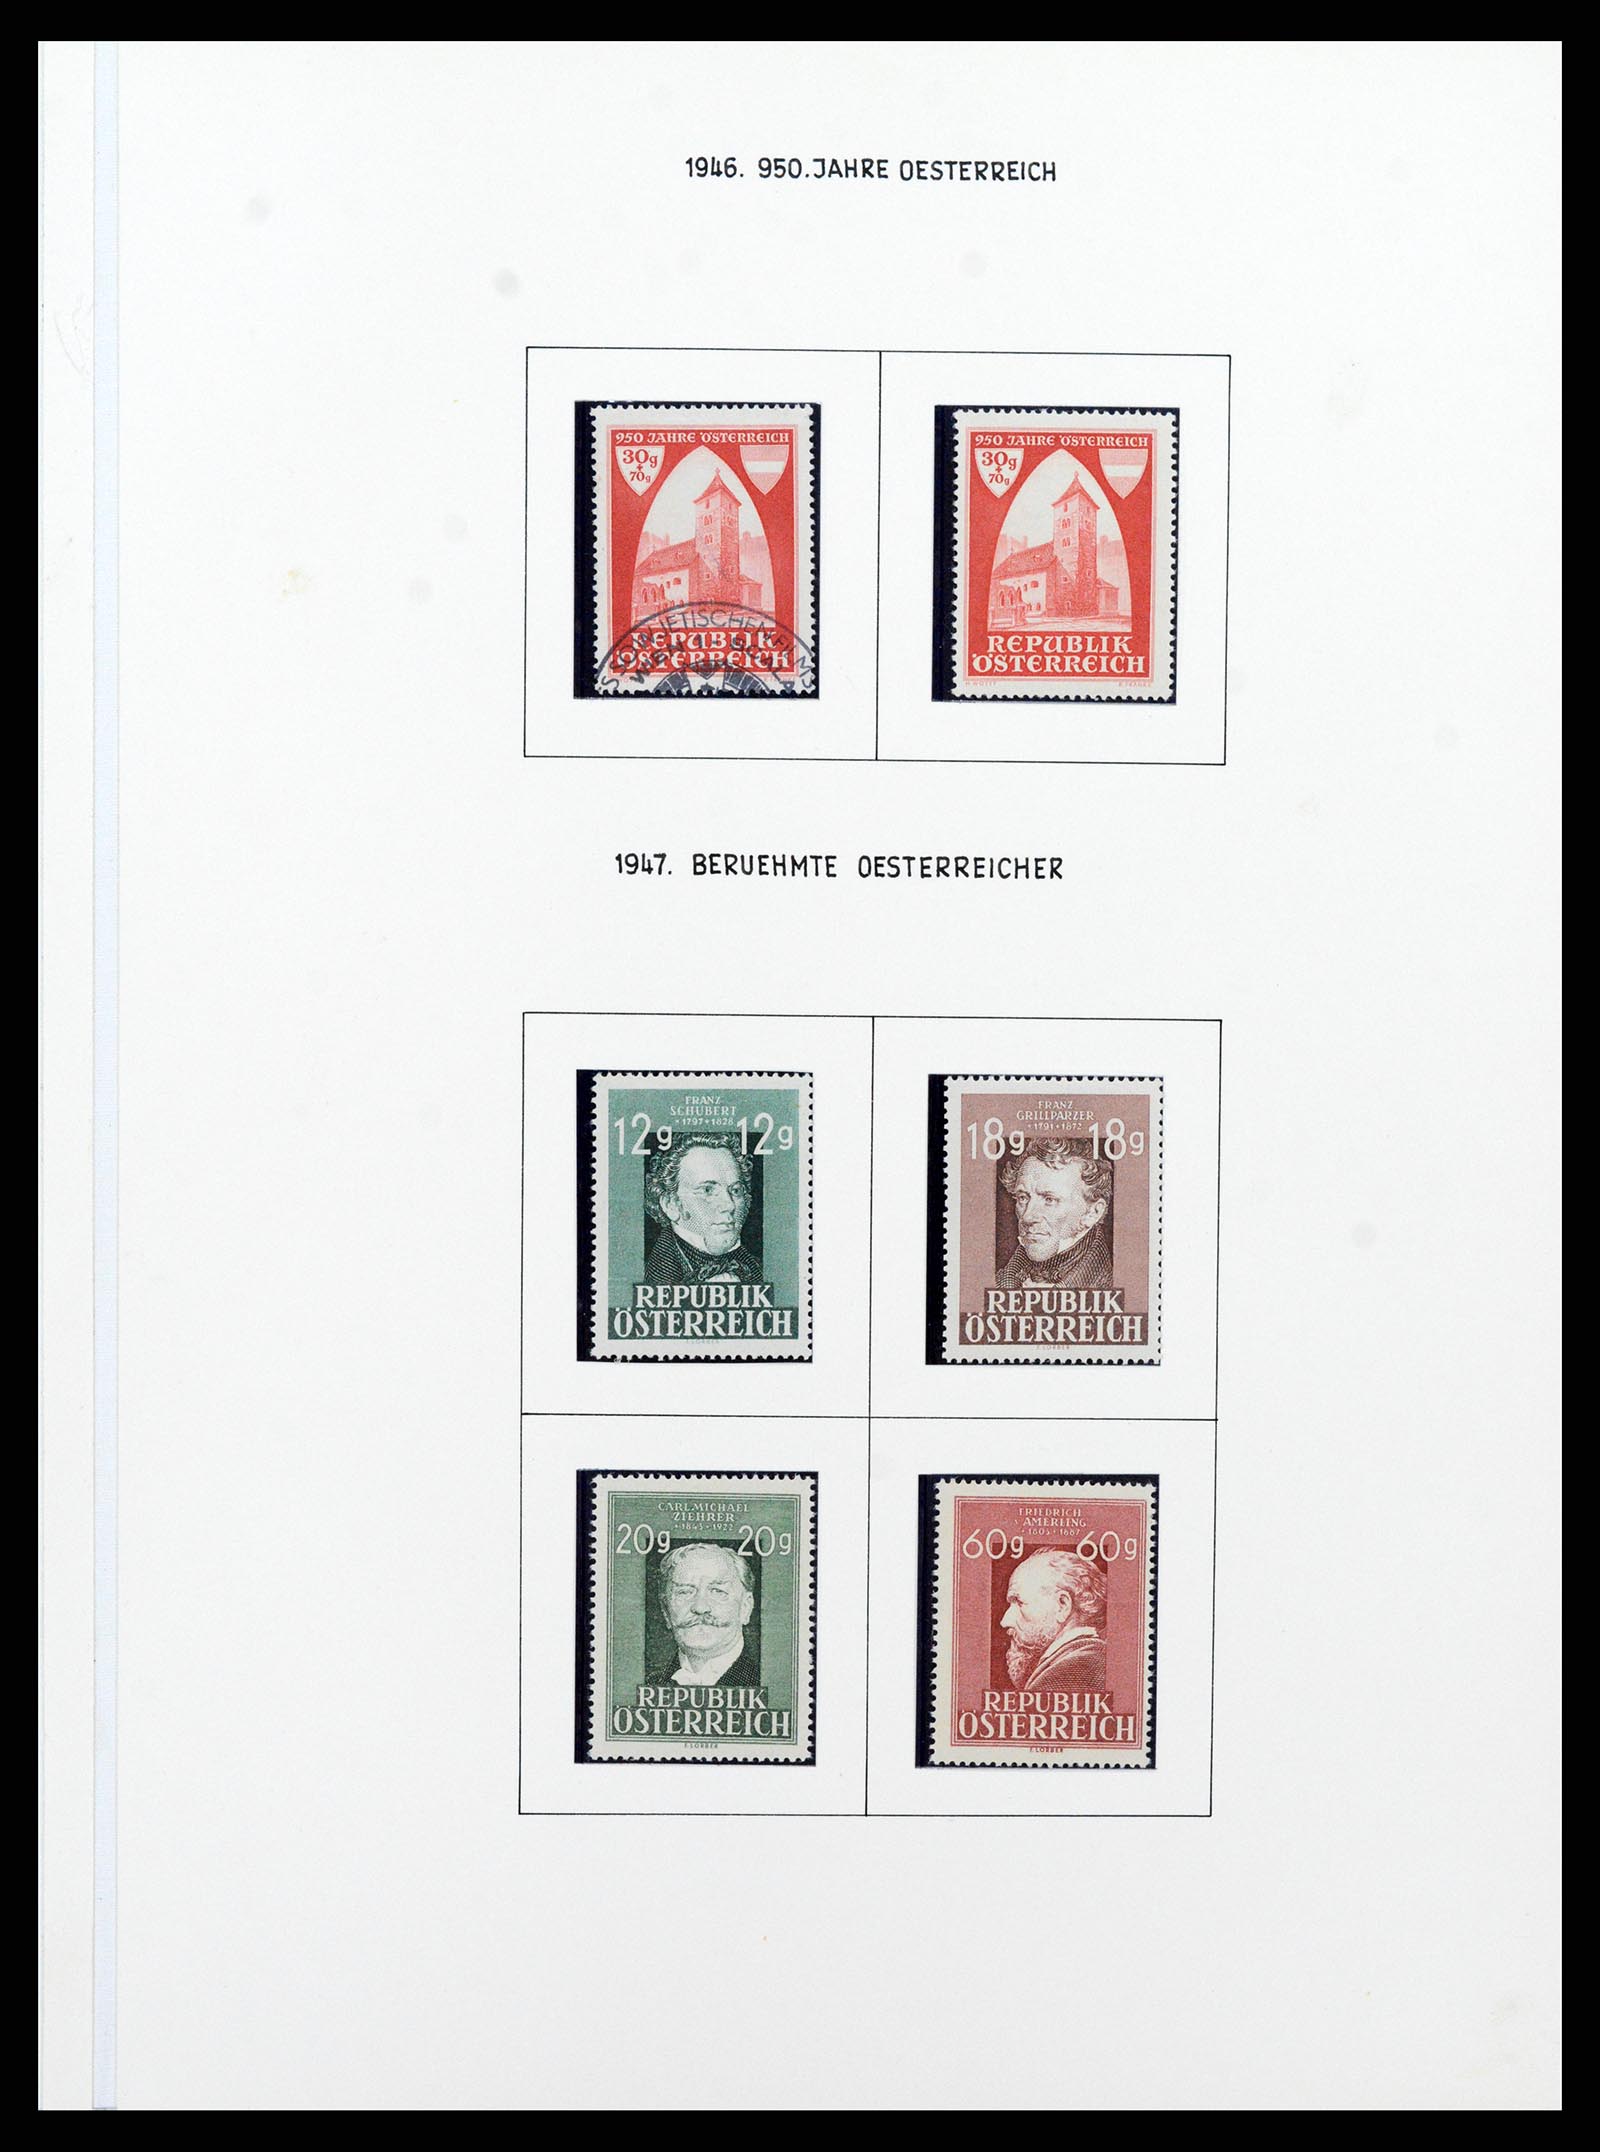 37090 592 - Stamp collection 37090 Austria supercollection 1850-1947.